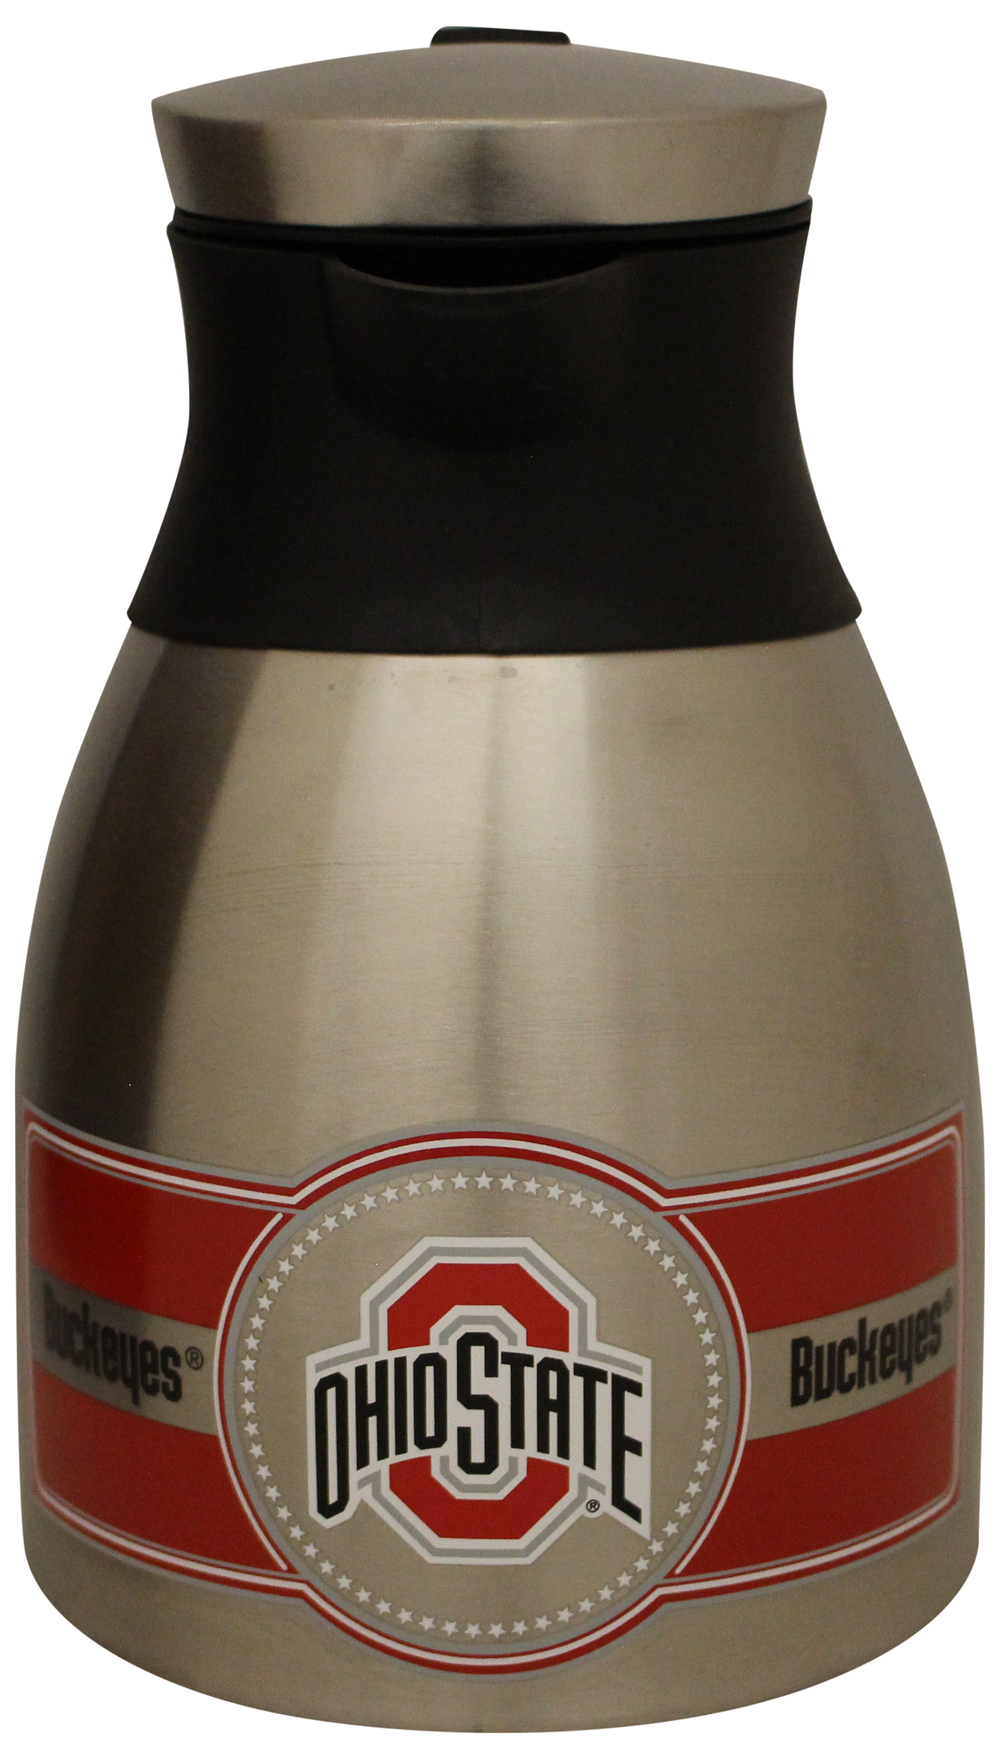 Ohio State Buckeyes Stainless Steel 34oz Coffee Pot Drink Ware 32031